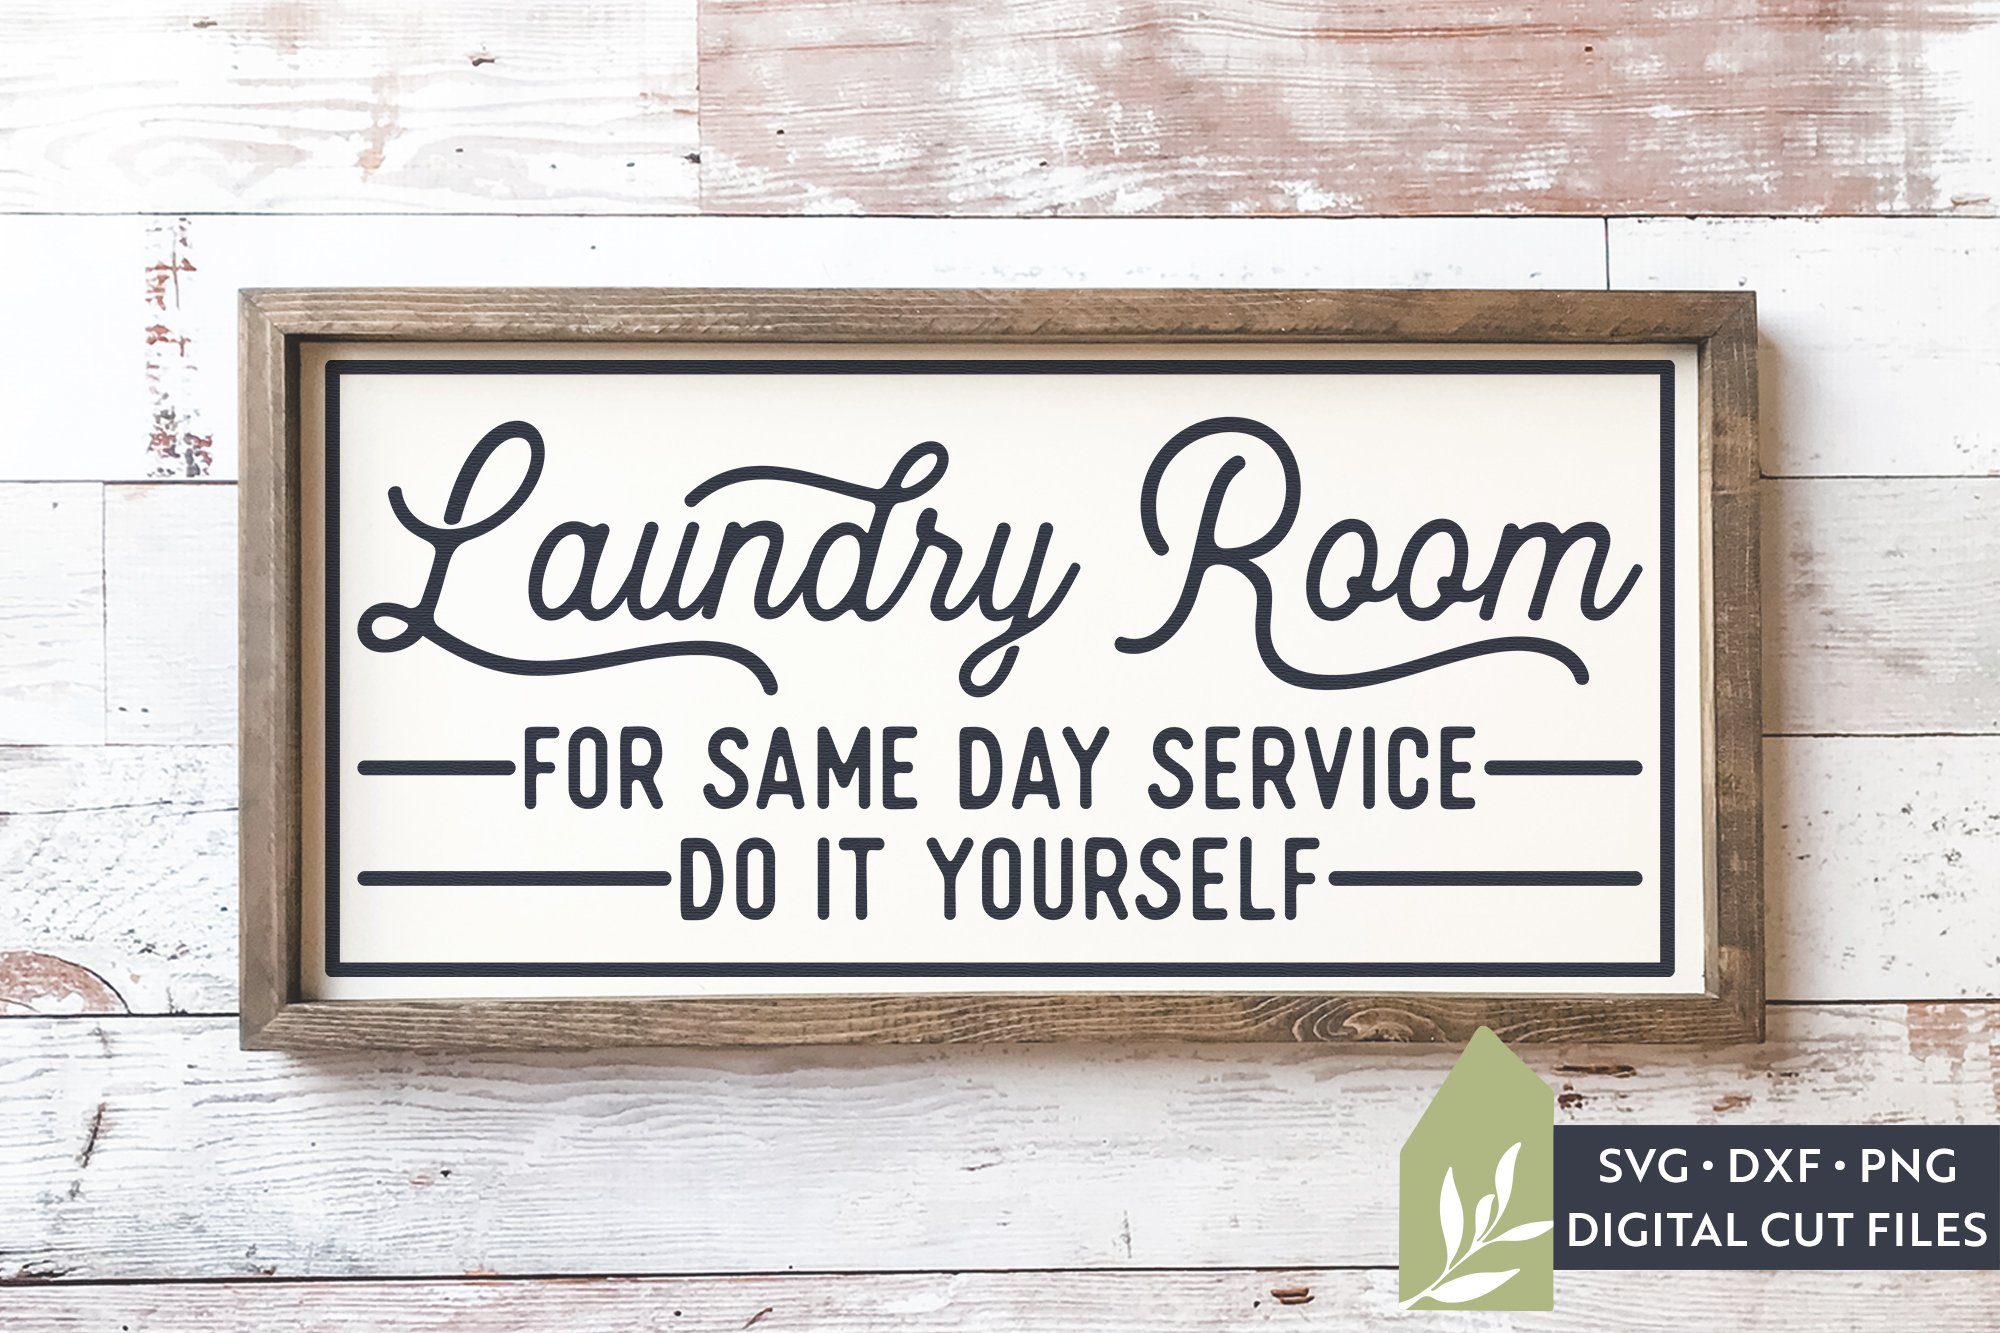 Download Png Dxf Laundry Room Svg Home Decor Svg Farmhouse Svg Svg Cut File Laundry Svg Laundry Room Loads Of Fun Svg Svg Files For Cricut Art Collectibles Digital Safarni Org